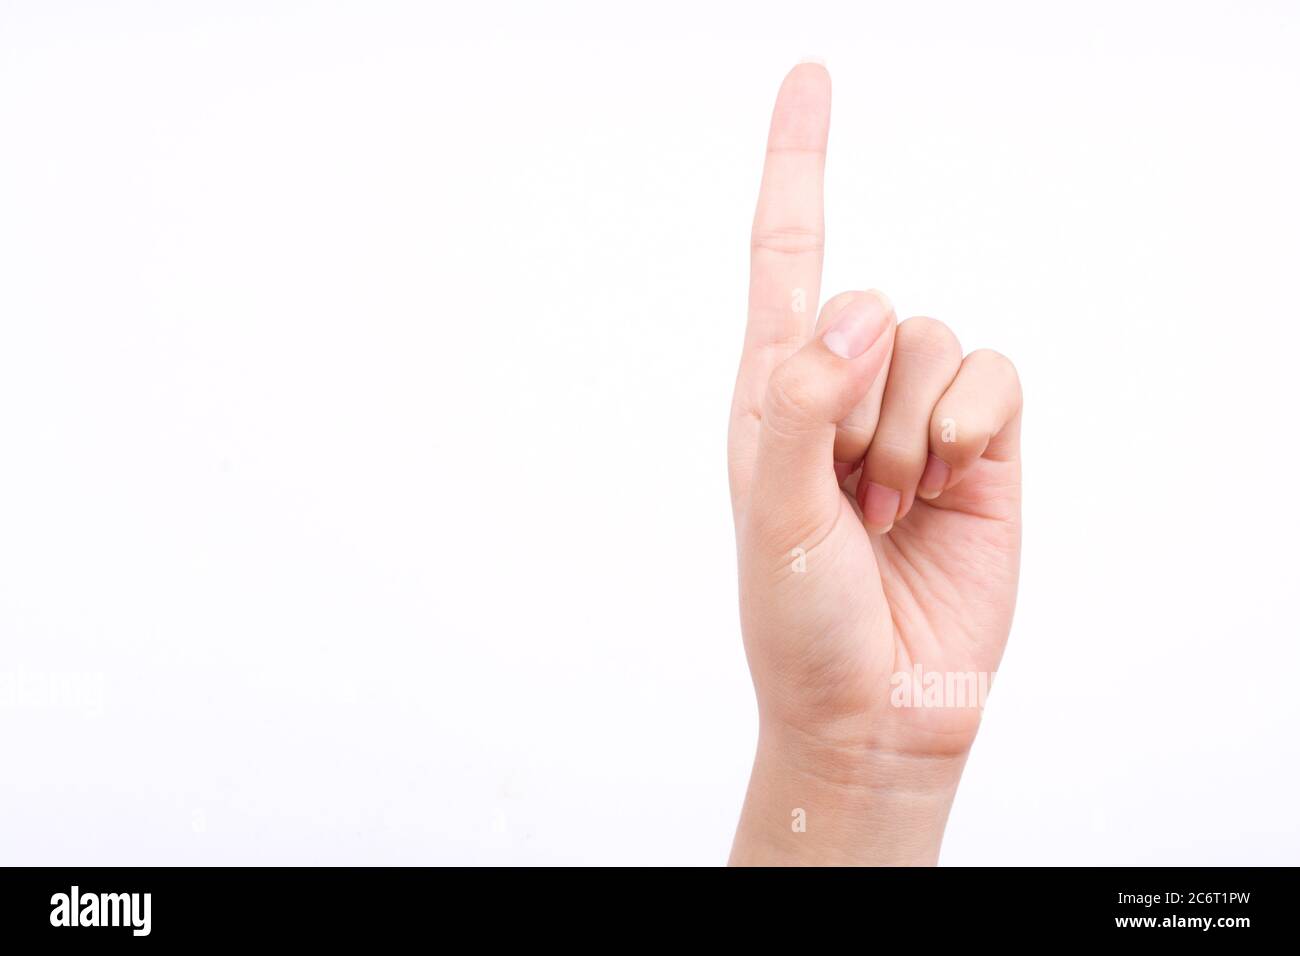 finger hand symbols isolated concept god thumbs pointing pray on the white background Stock Photo